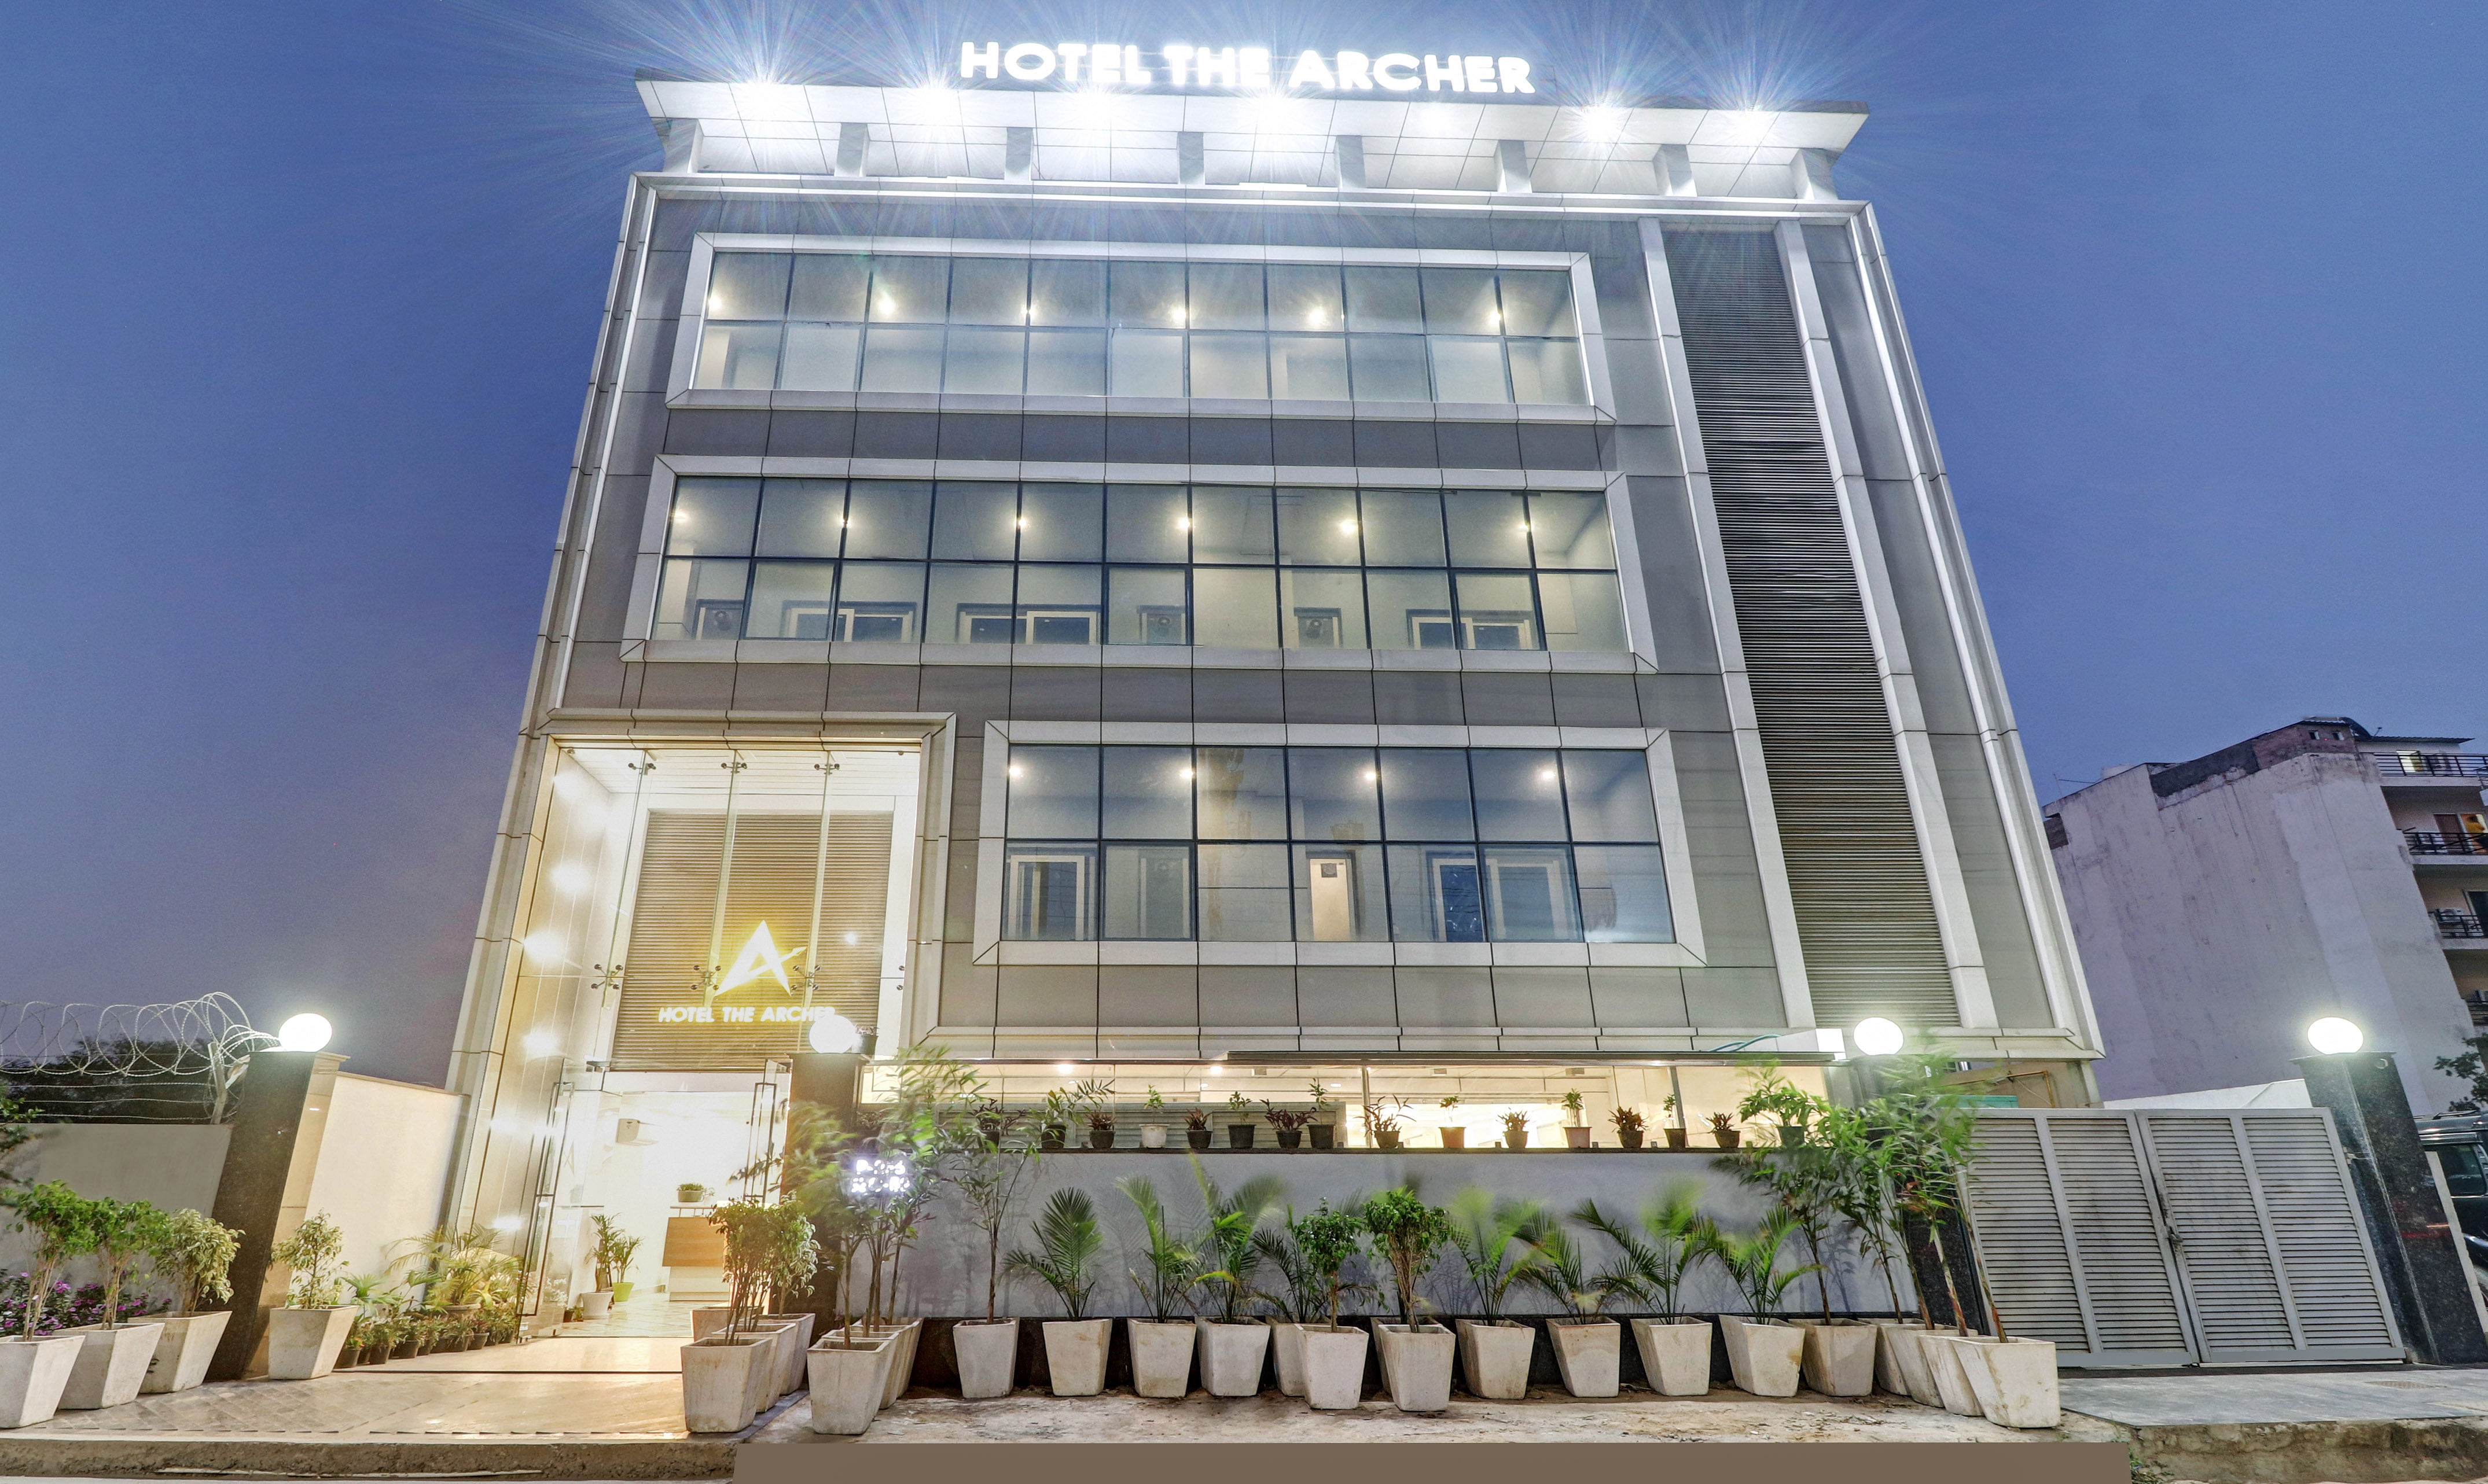 Hotel The Archer in Sector 52, Gurgaon